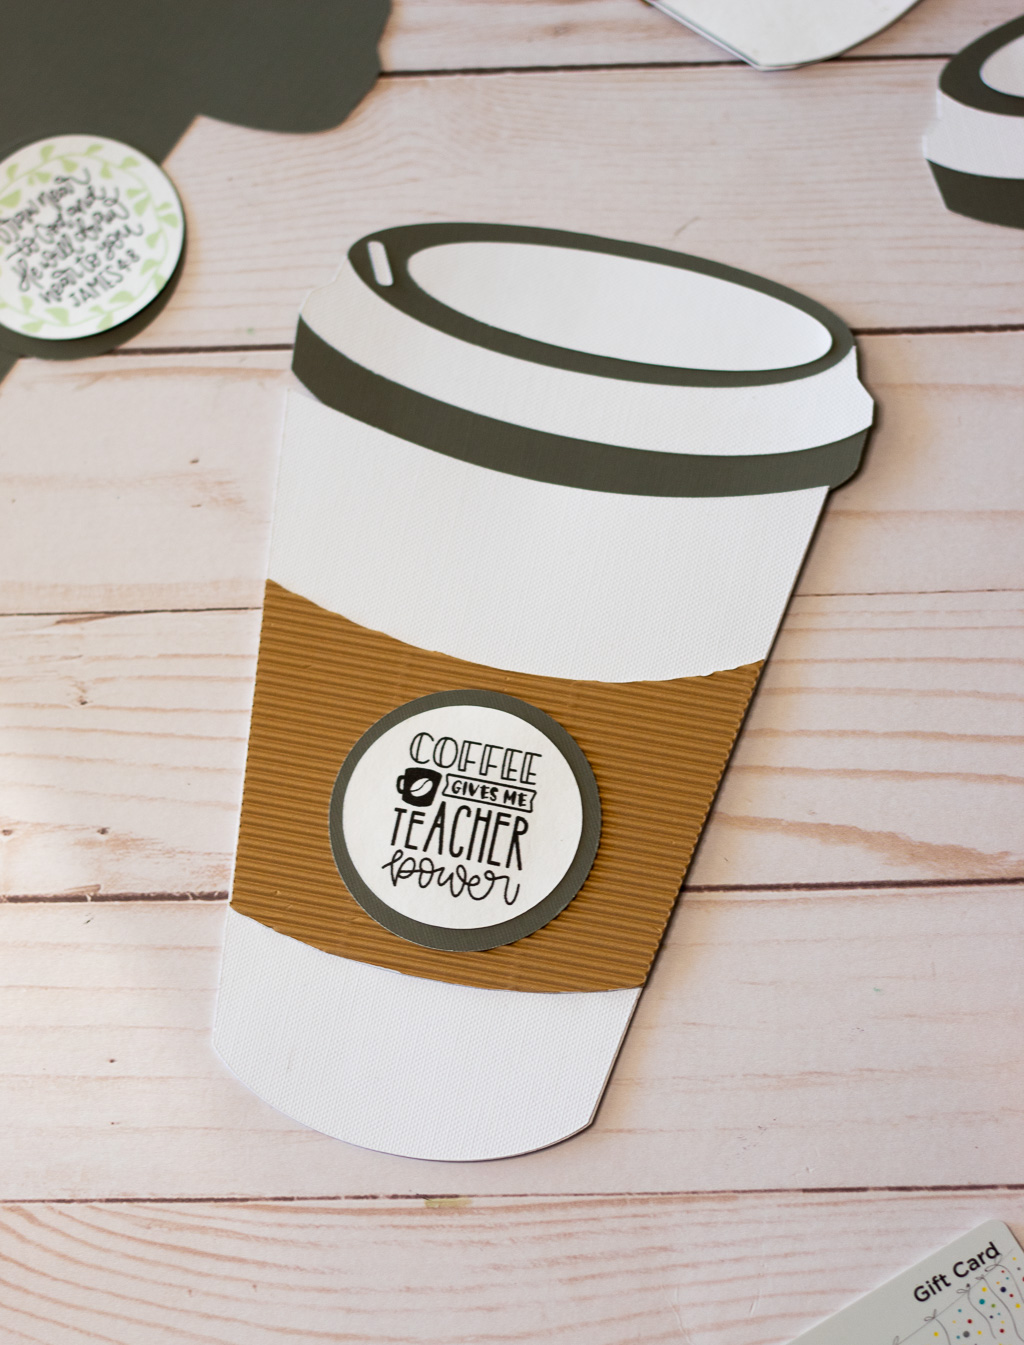 Cricut Jpg Scrapbook Coffee Cup Gift Card Holder Cutfile for Silhouette Present SVG Drink Pdf Dxf Eps Png Gift Coffee House